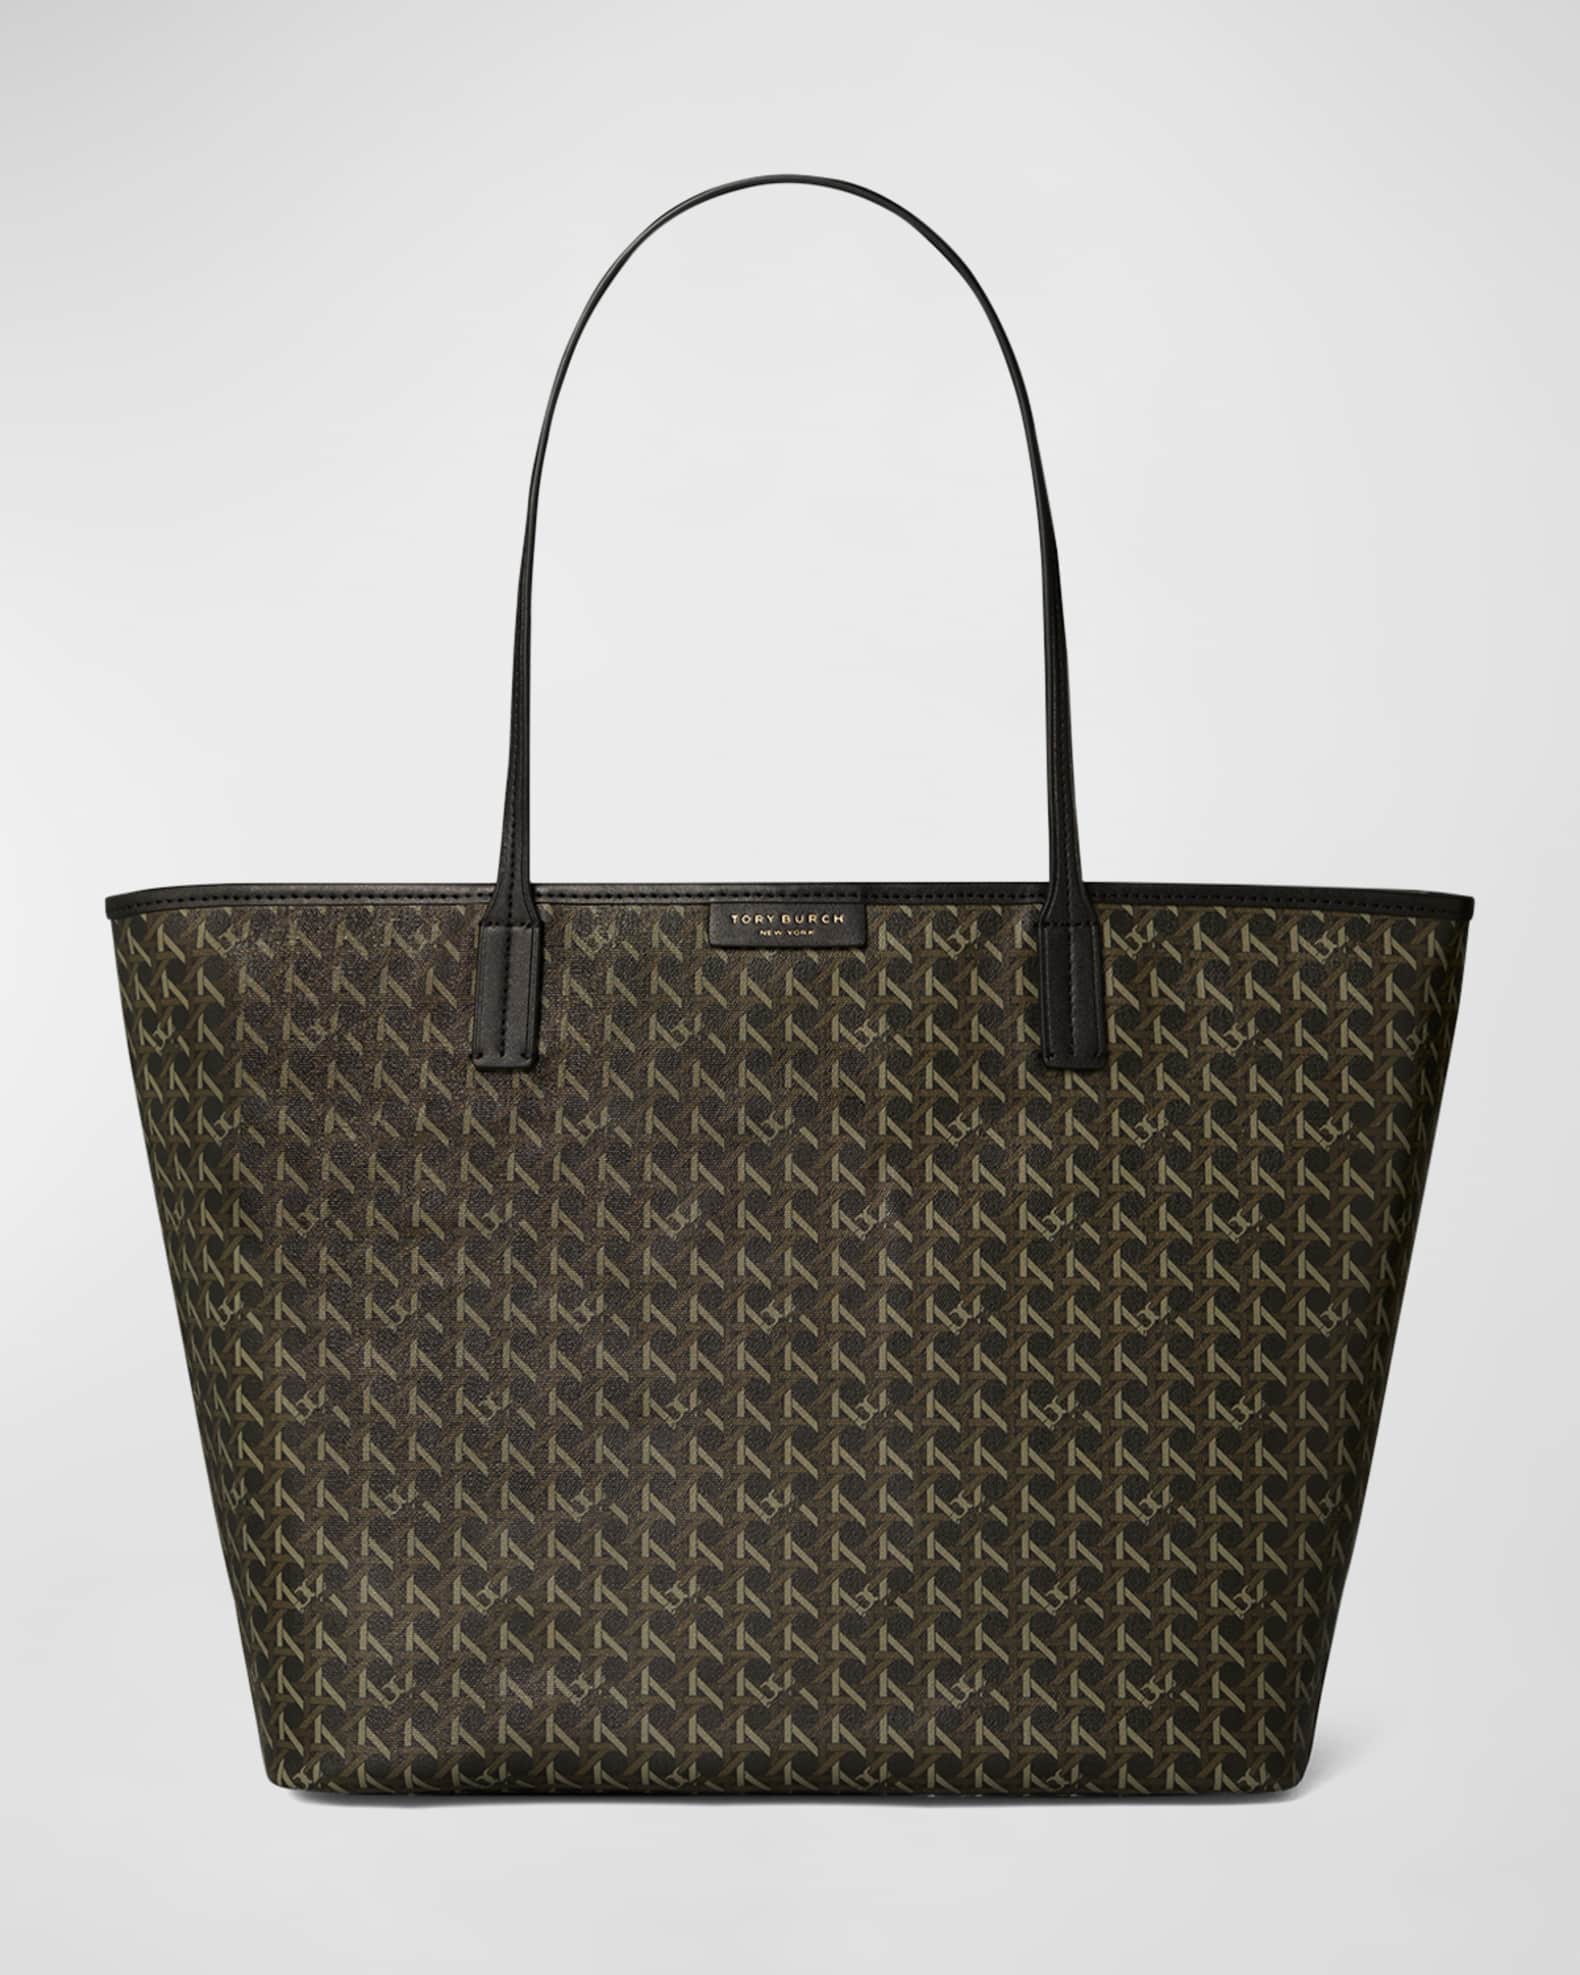 Tory Burch Every-Ready Woven Monogram Tote Bag | Neiman Marcus